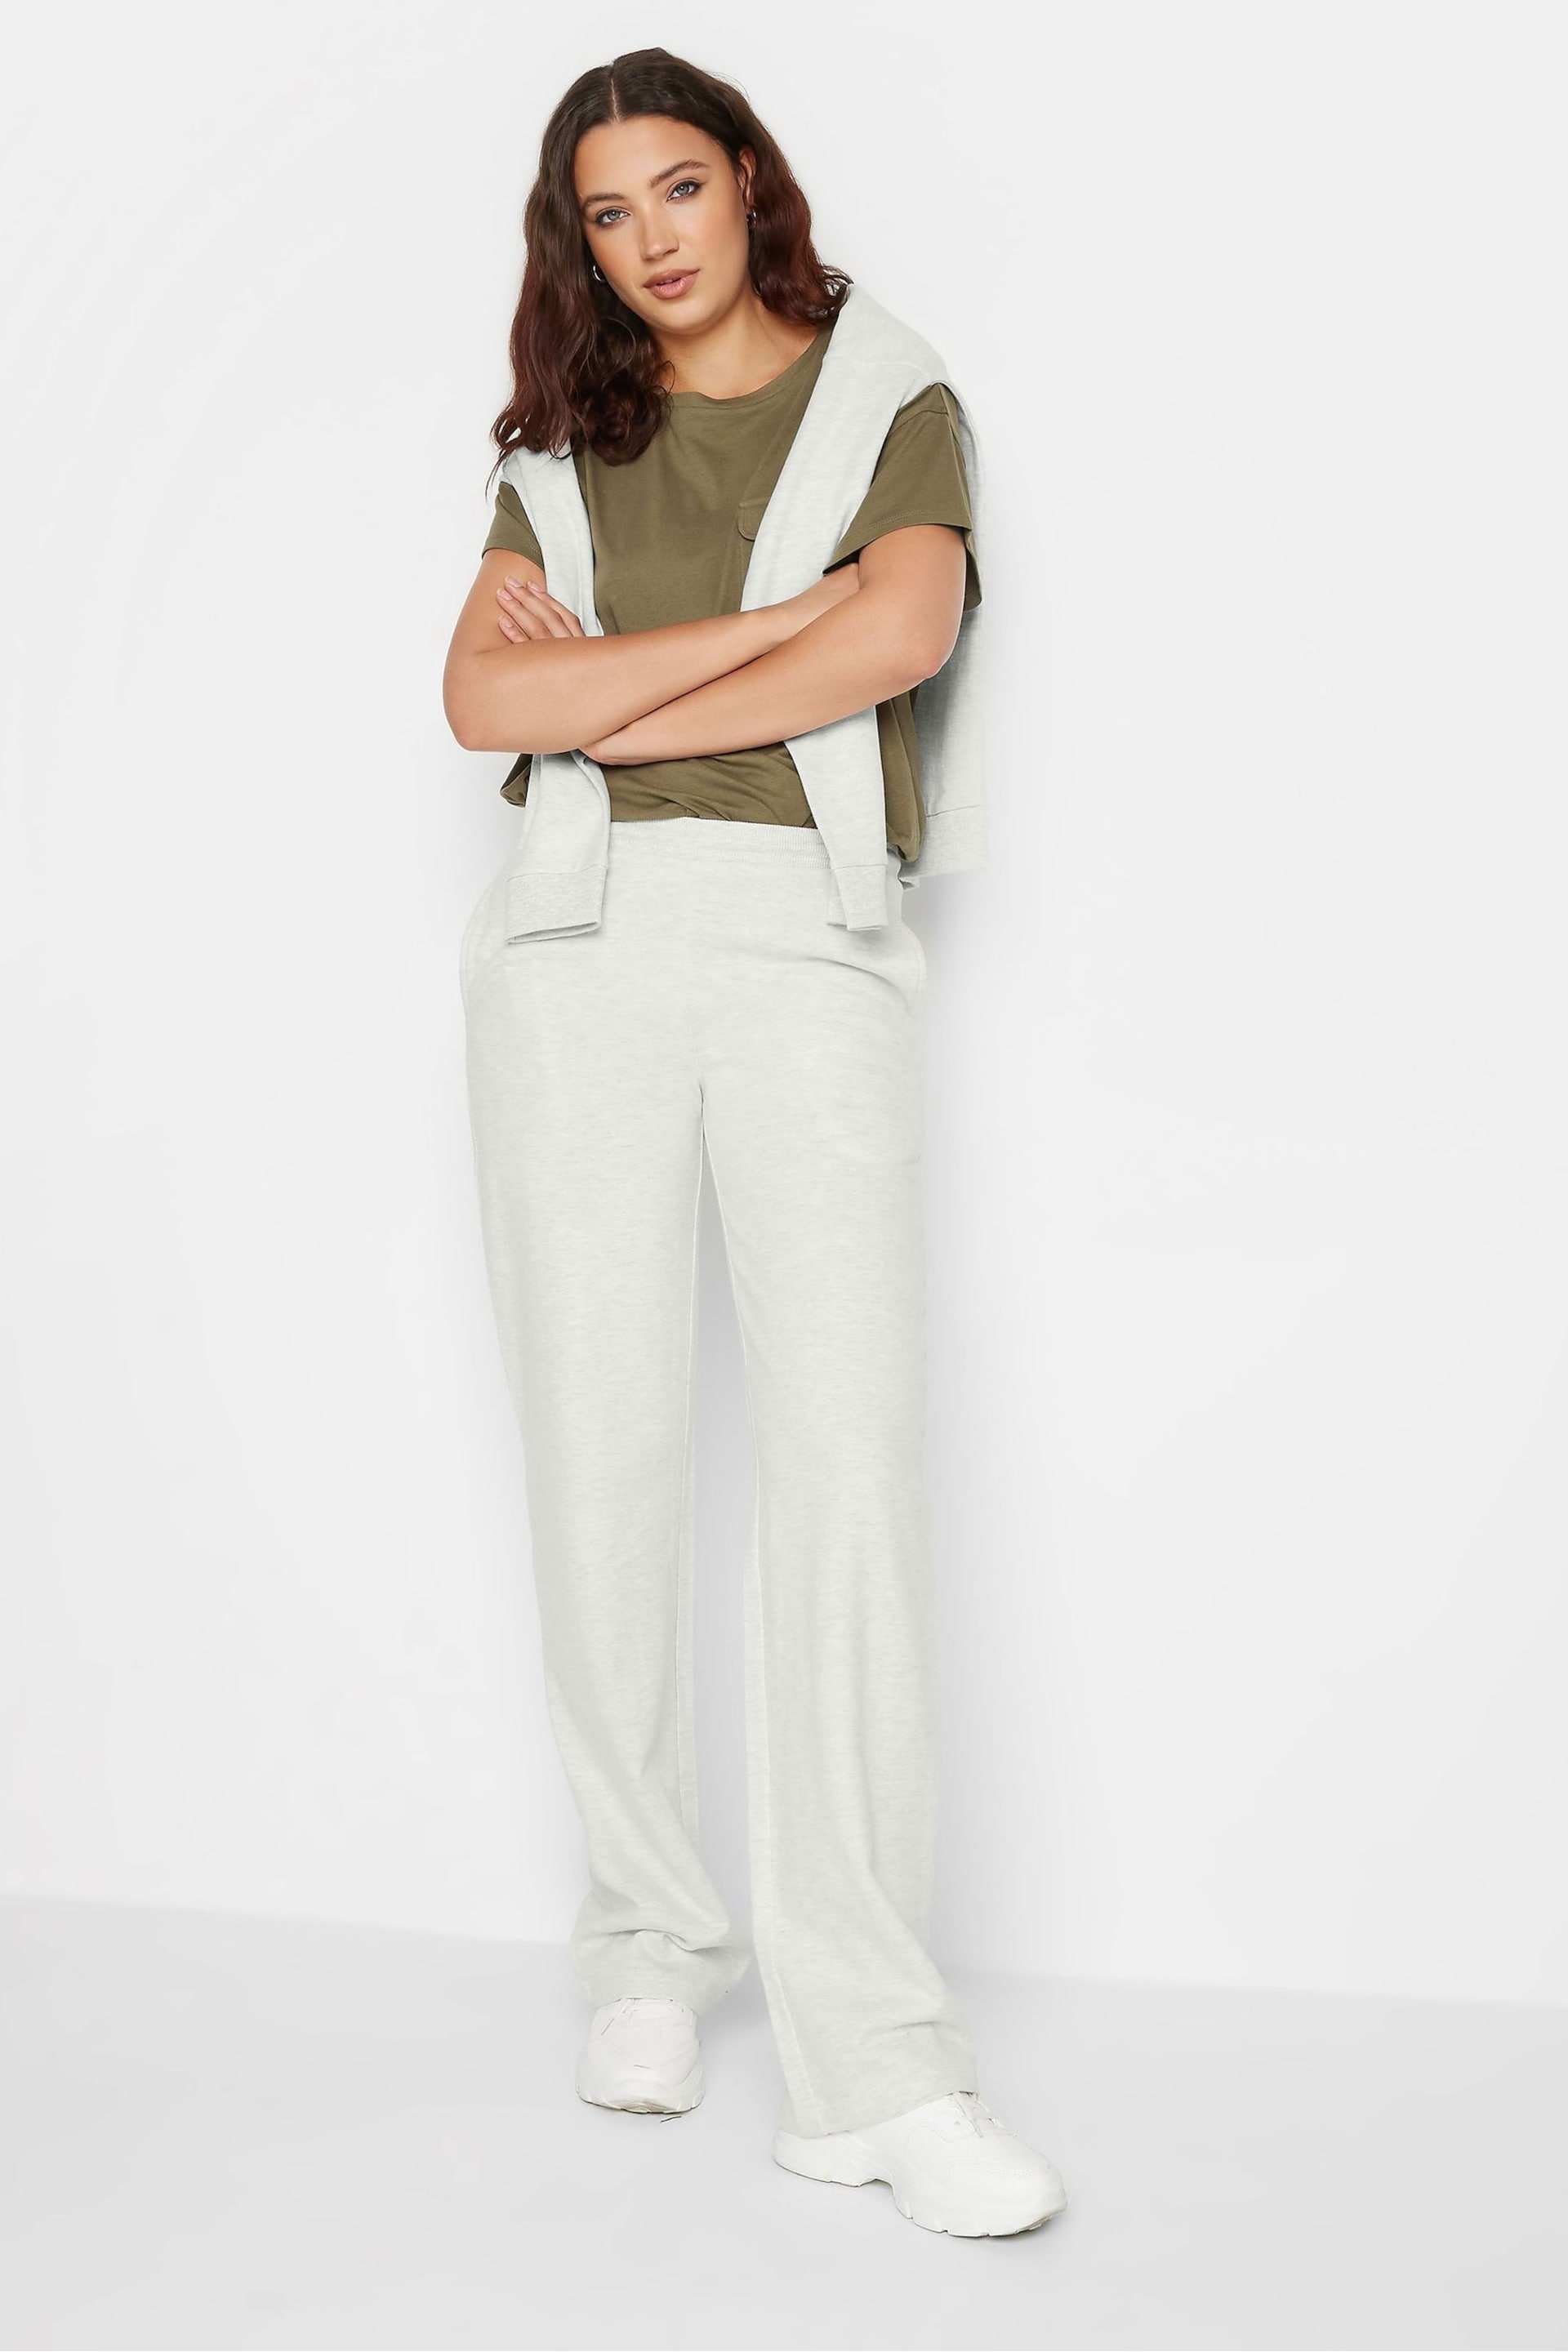 Long Tall Sally Grey Wide Leg Joggers - Image 1 of 4